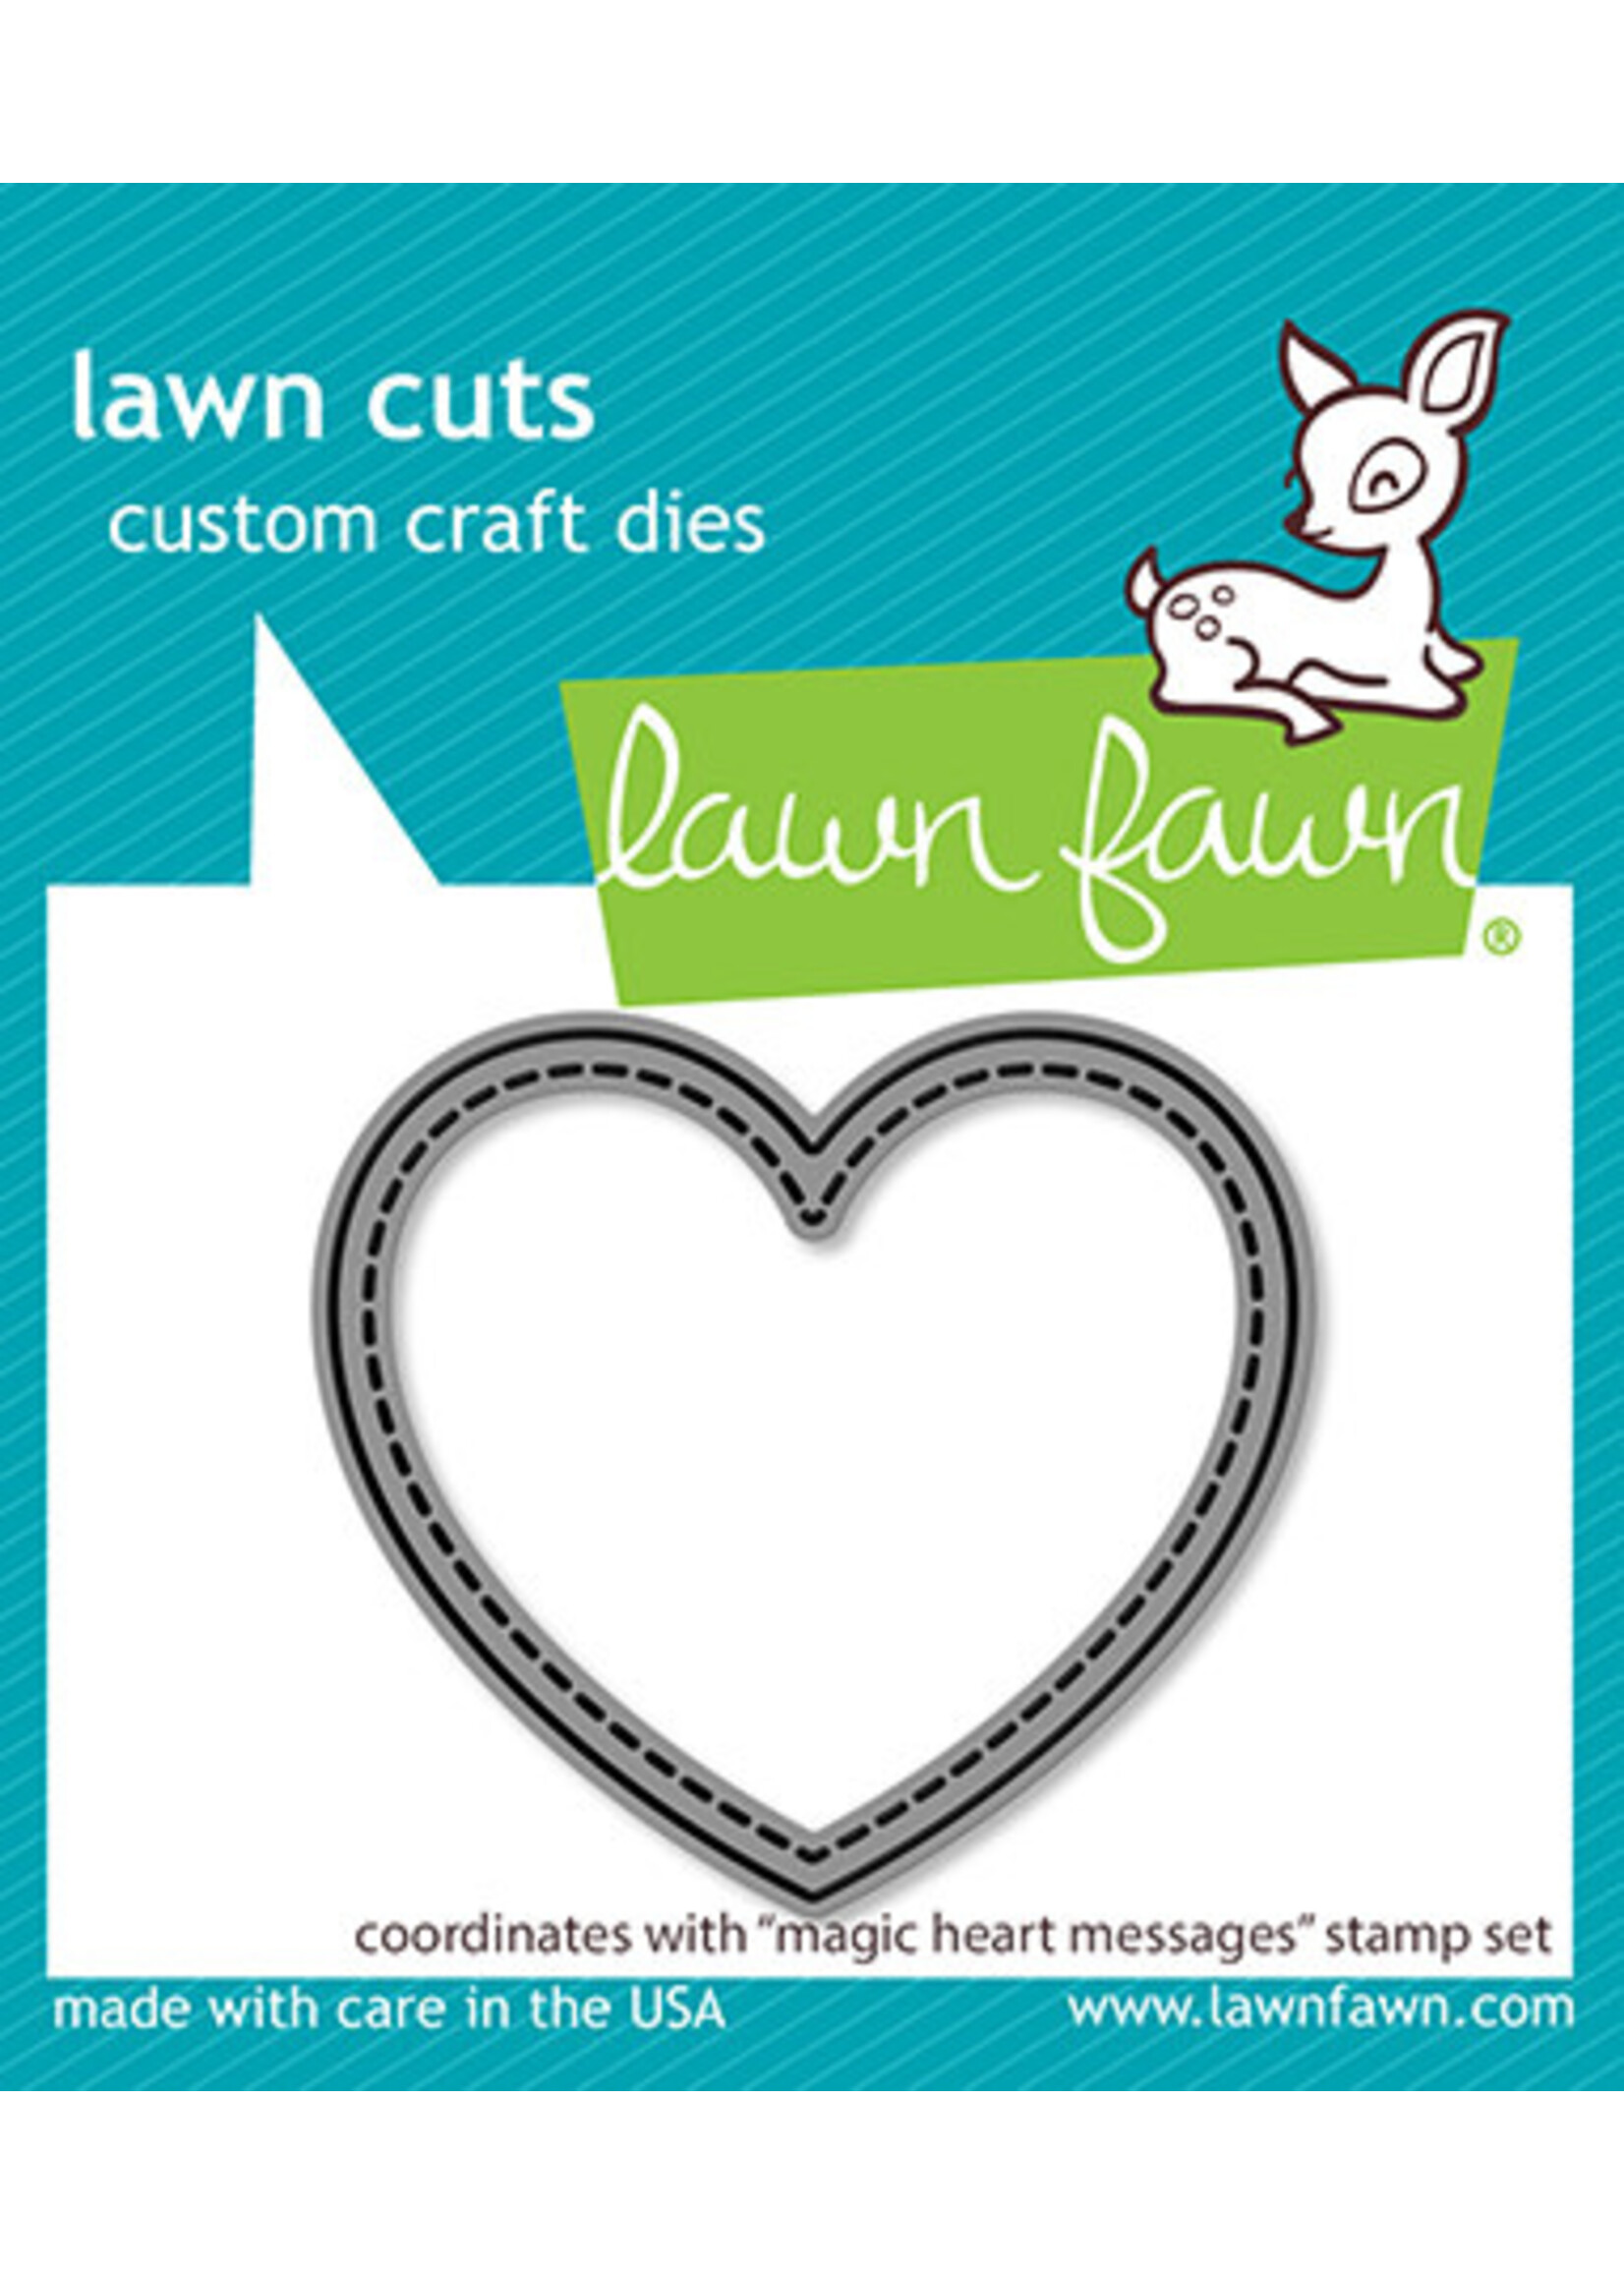 Lawn Fawn Magic heart messages stamp & die bundle